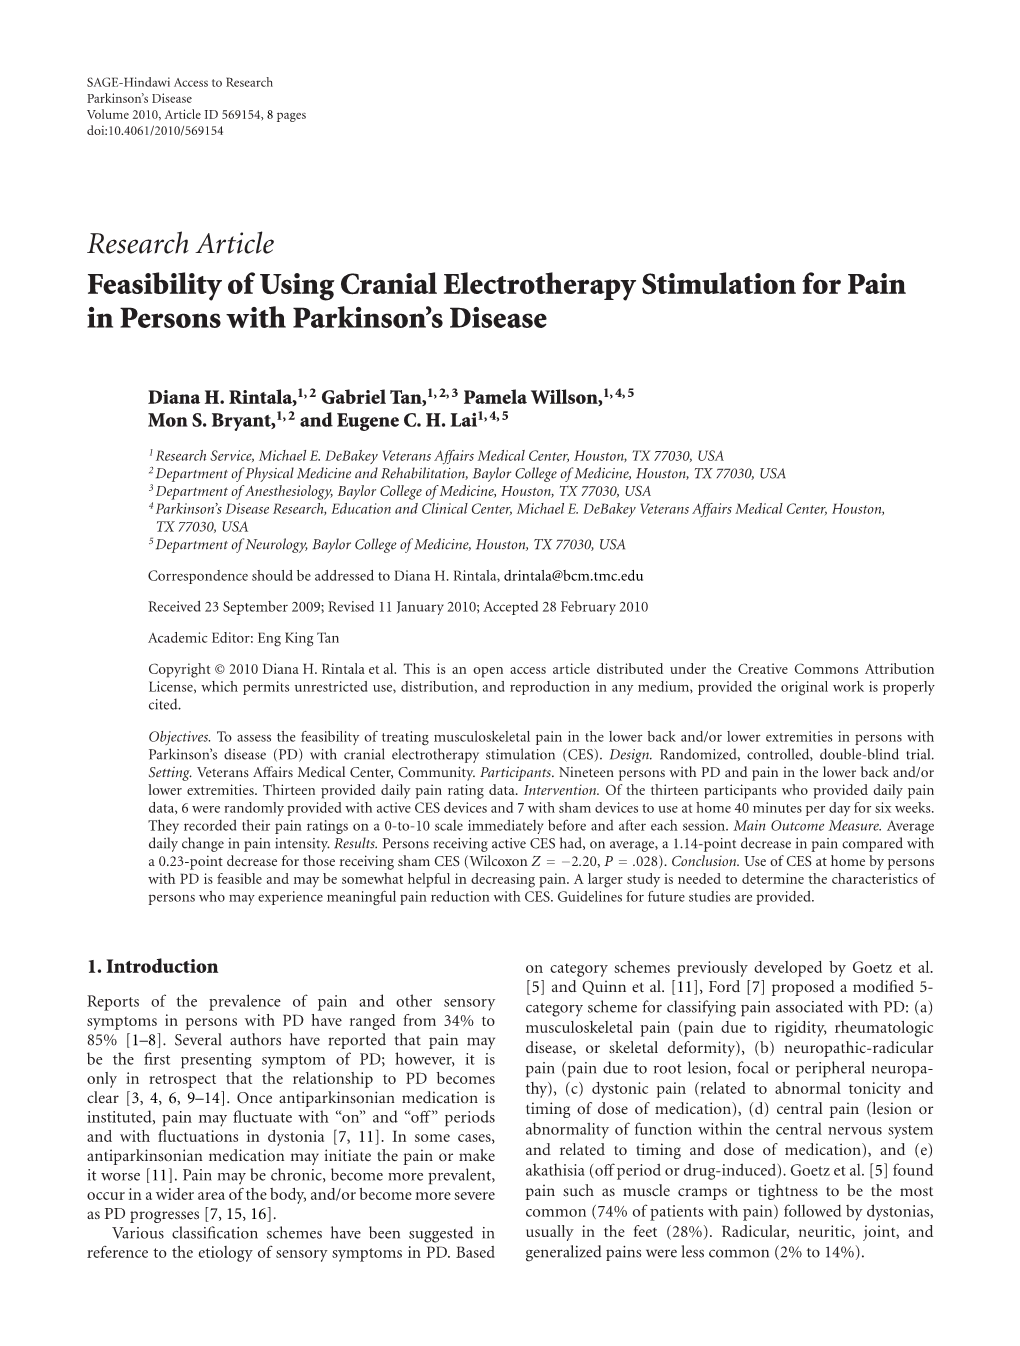 Research Article Feasibility of Using Cranial Electrotherapy Stimulation for Pain in Persons with Parkinson’S Disease